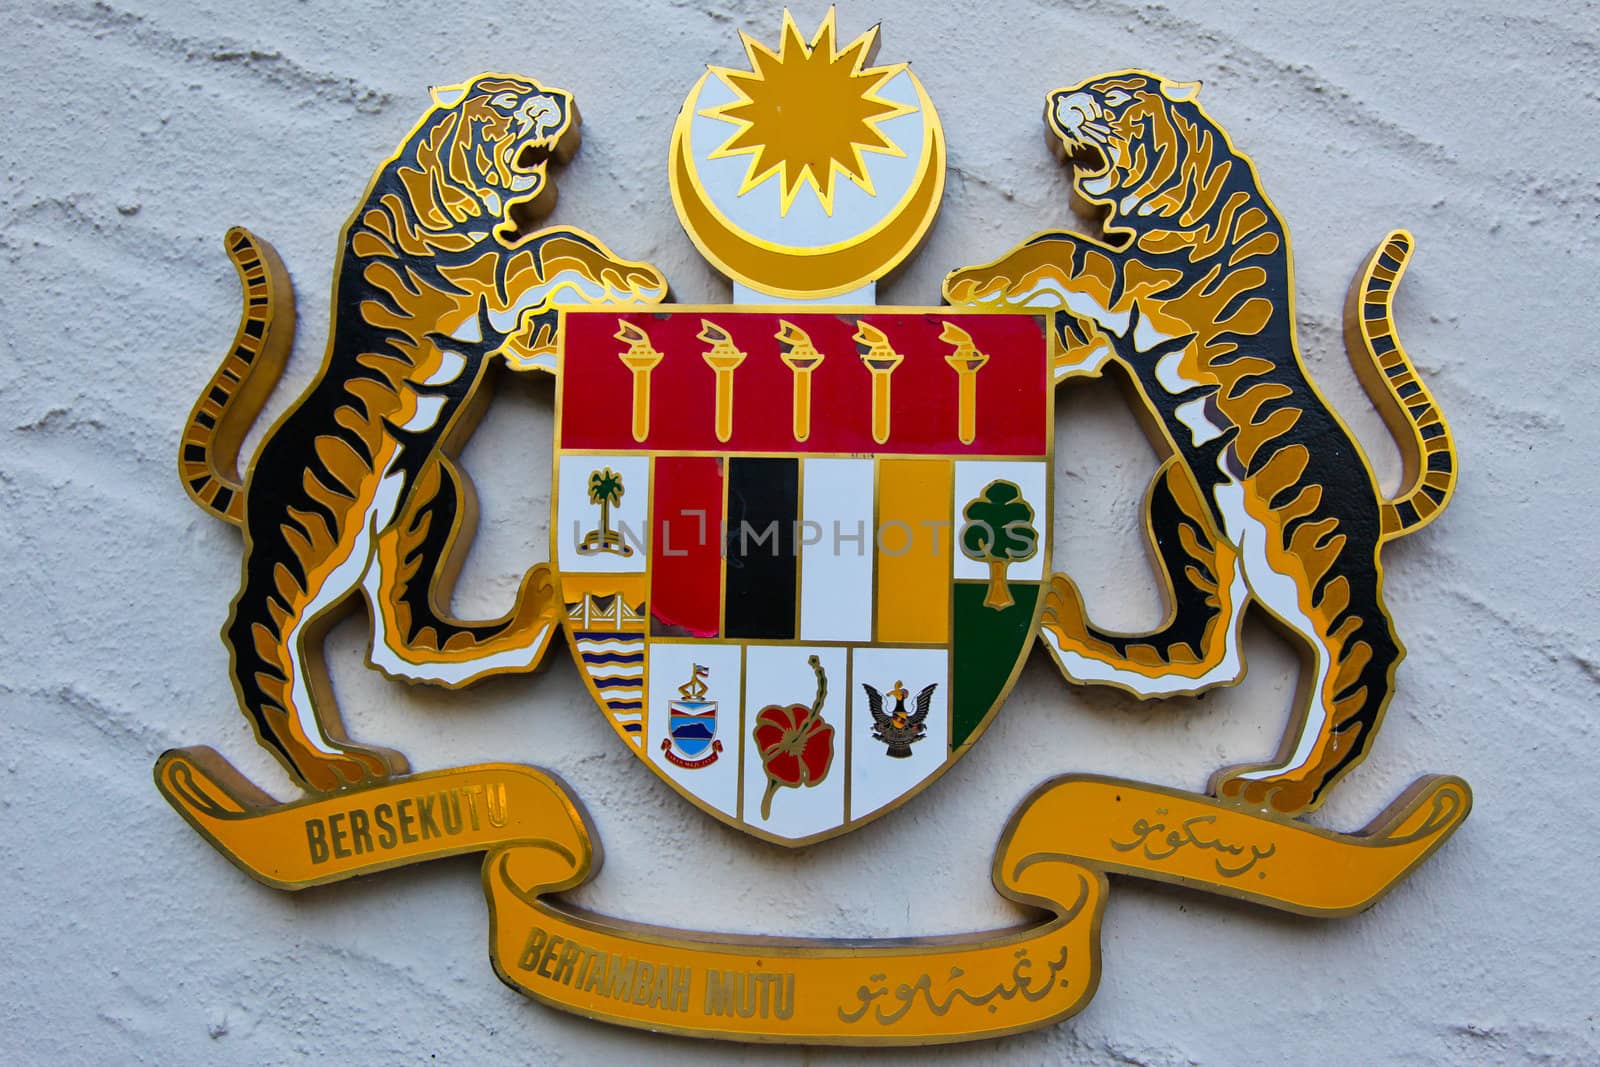 Malaysian Crest and Coat of Arms